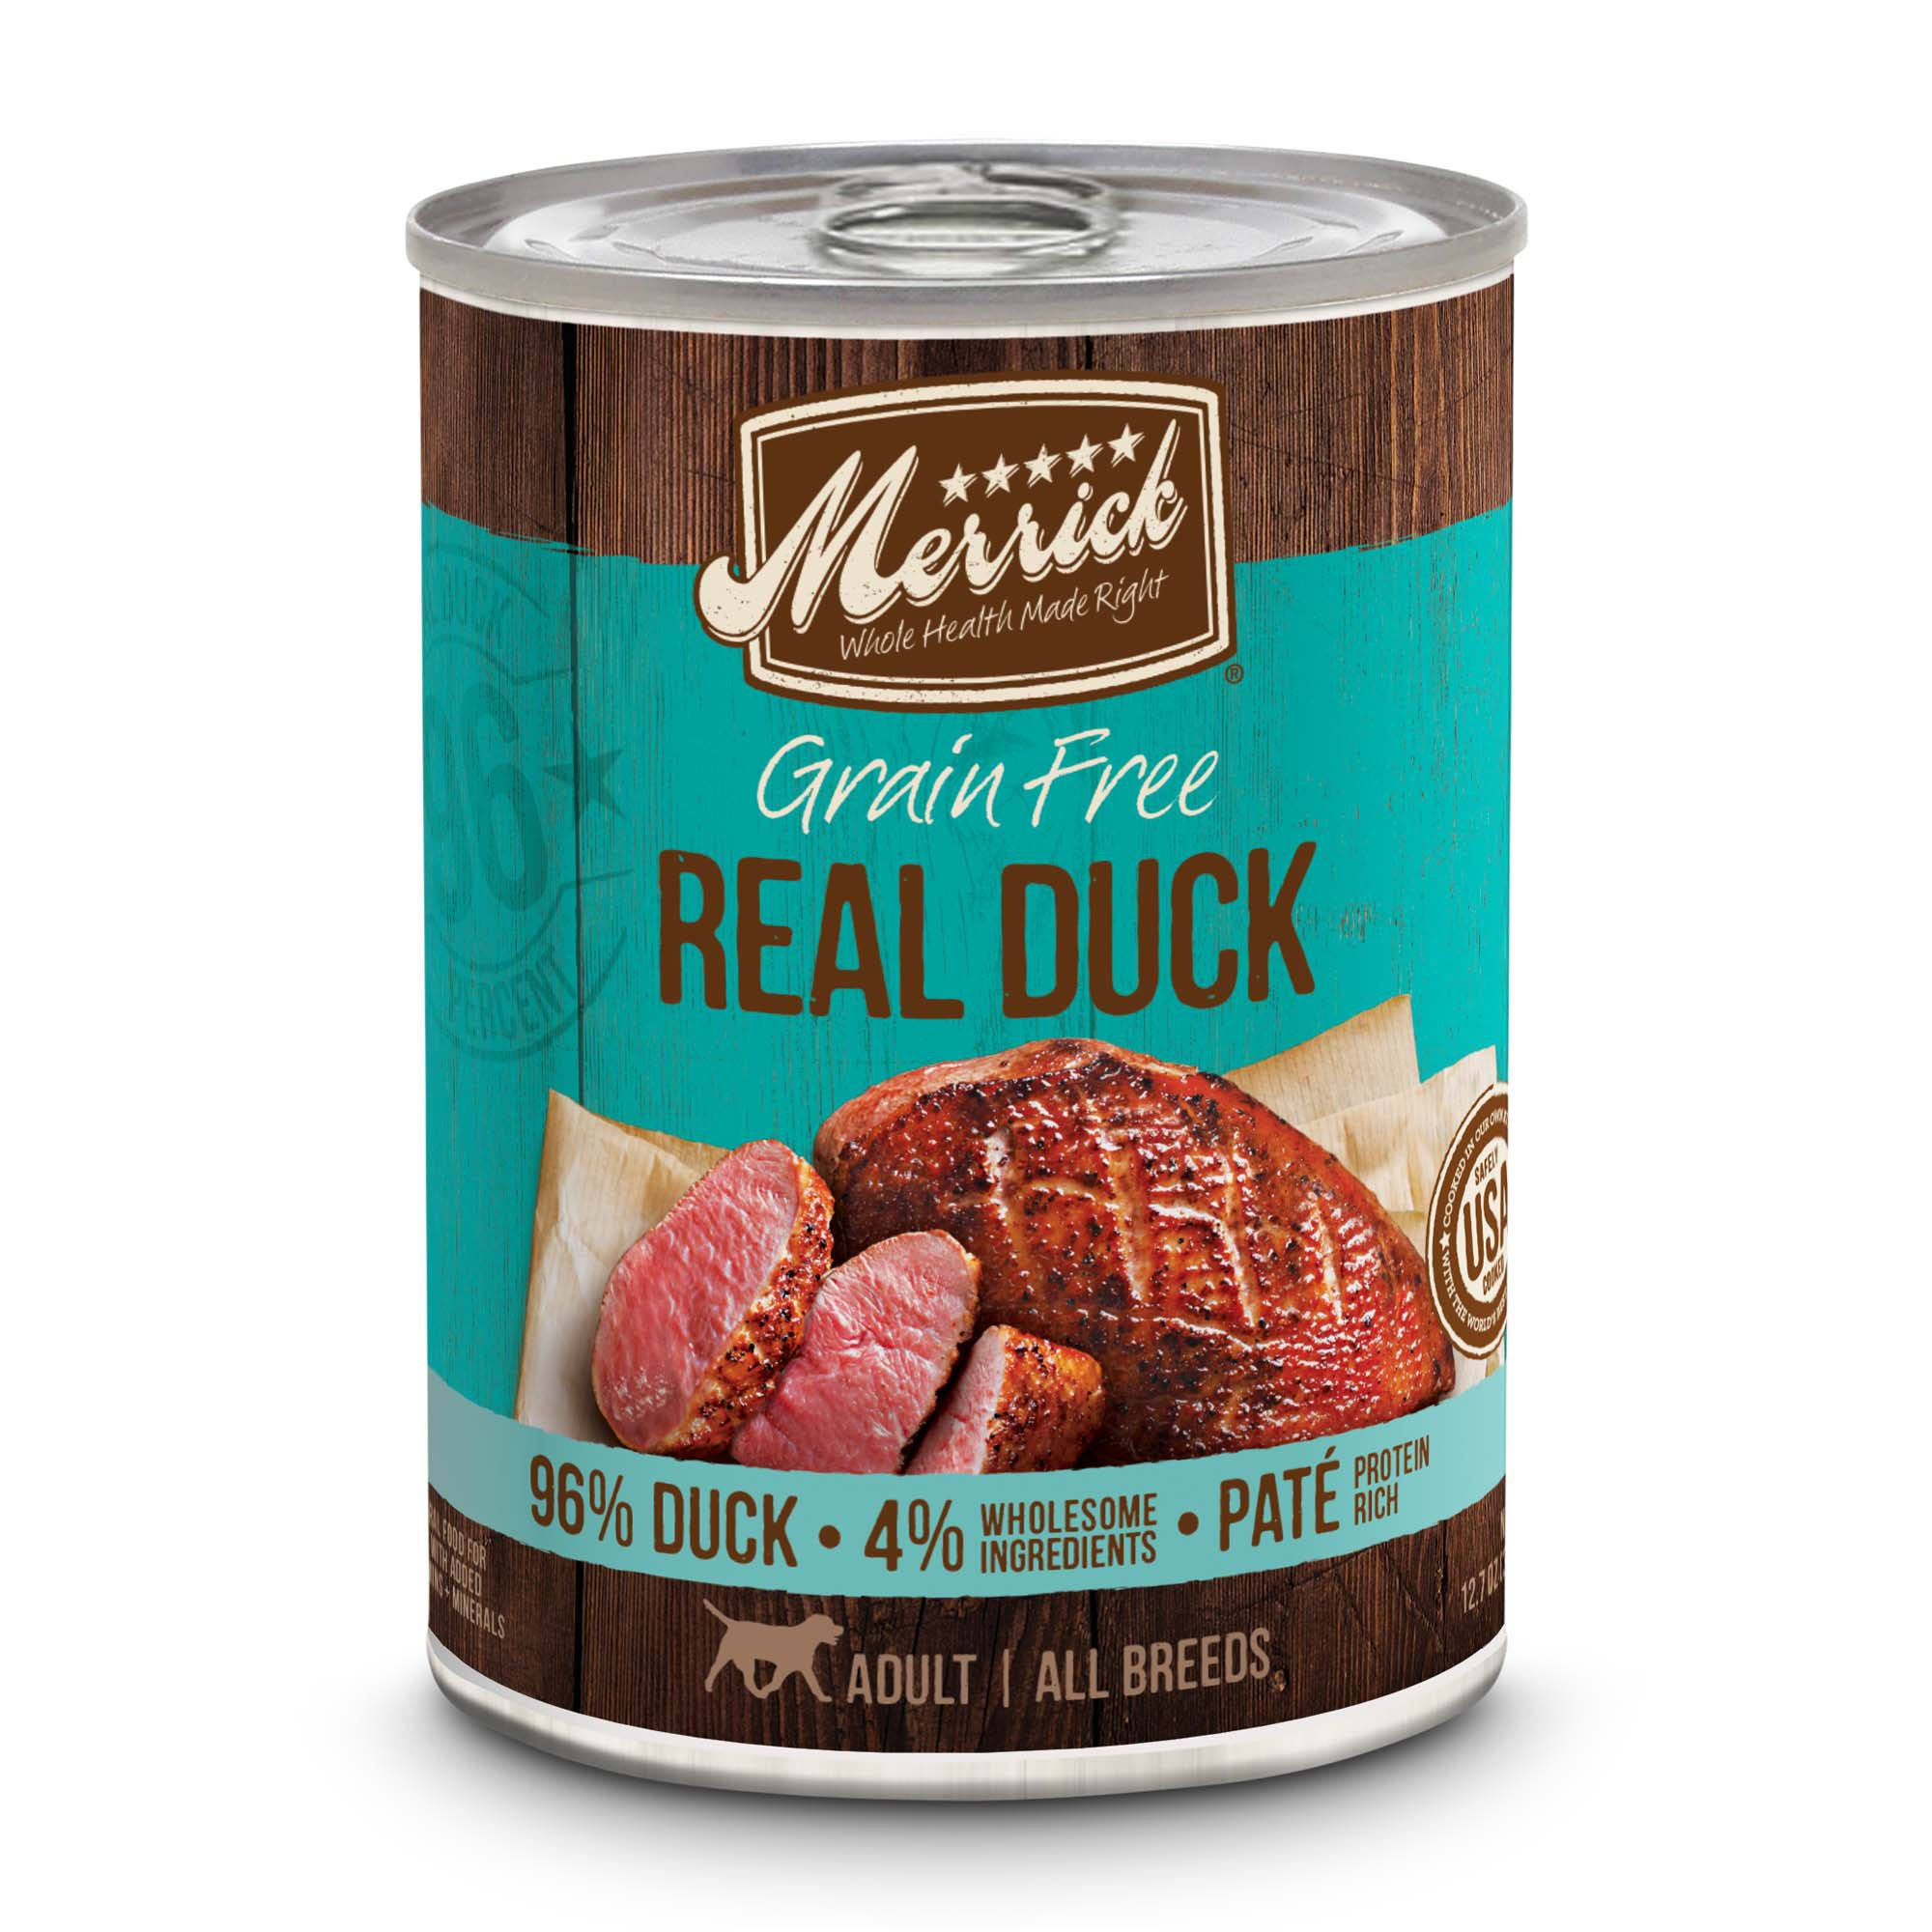 Merrick Grain-Free Real Duck Canned Dog Food, 12.7-oz, Case of 12